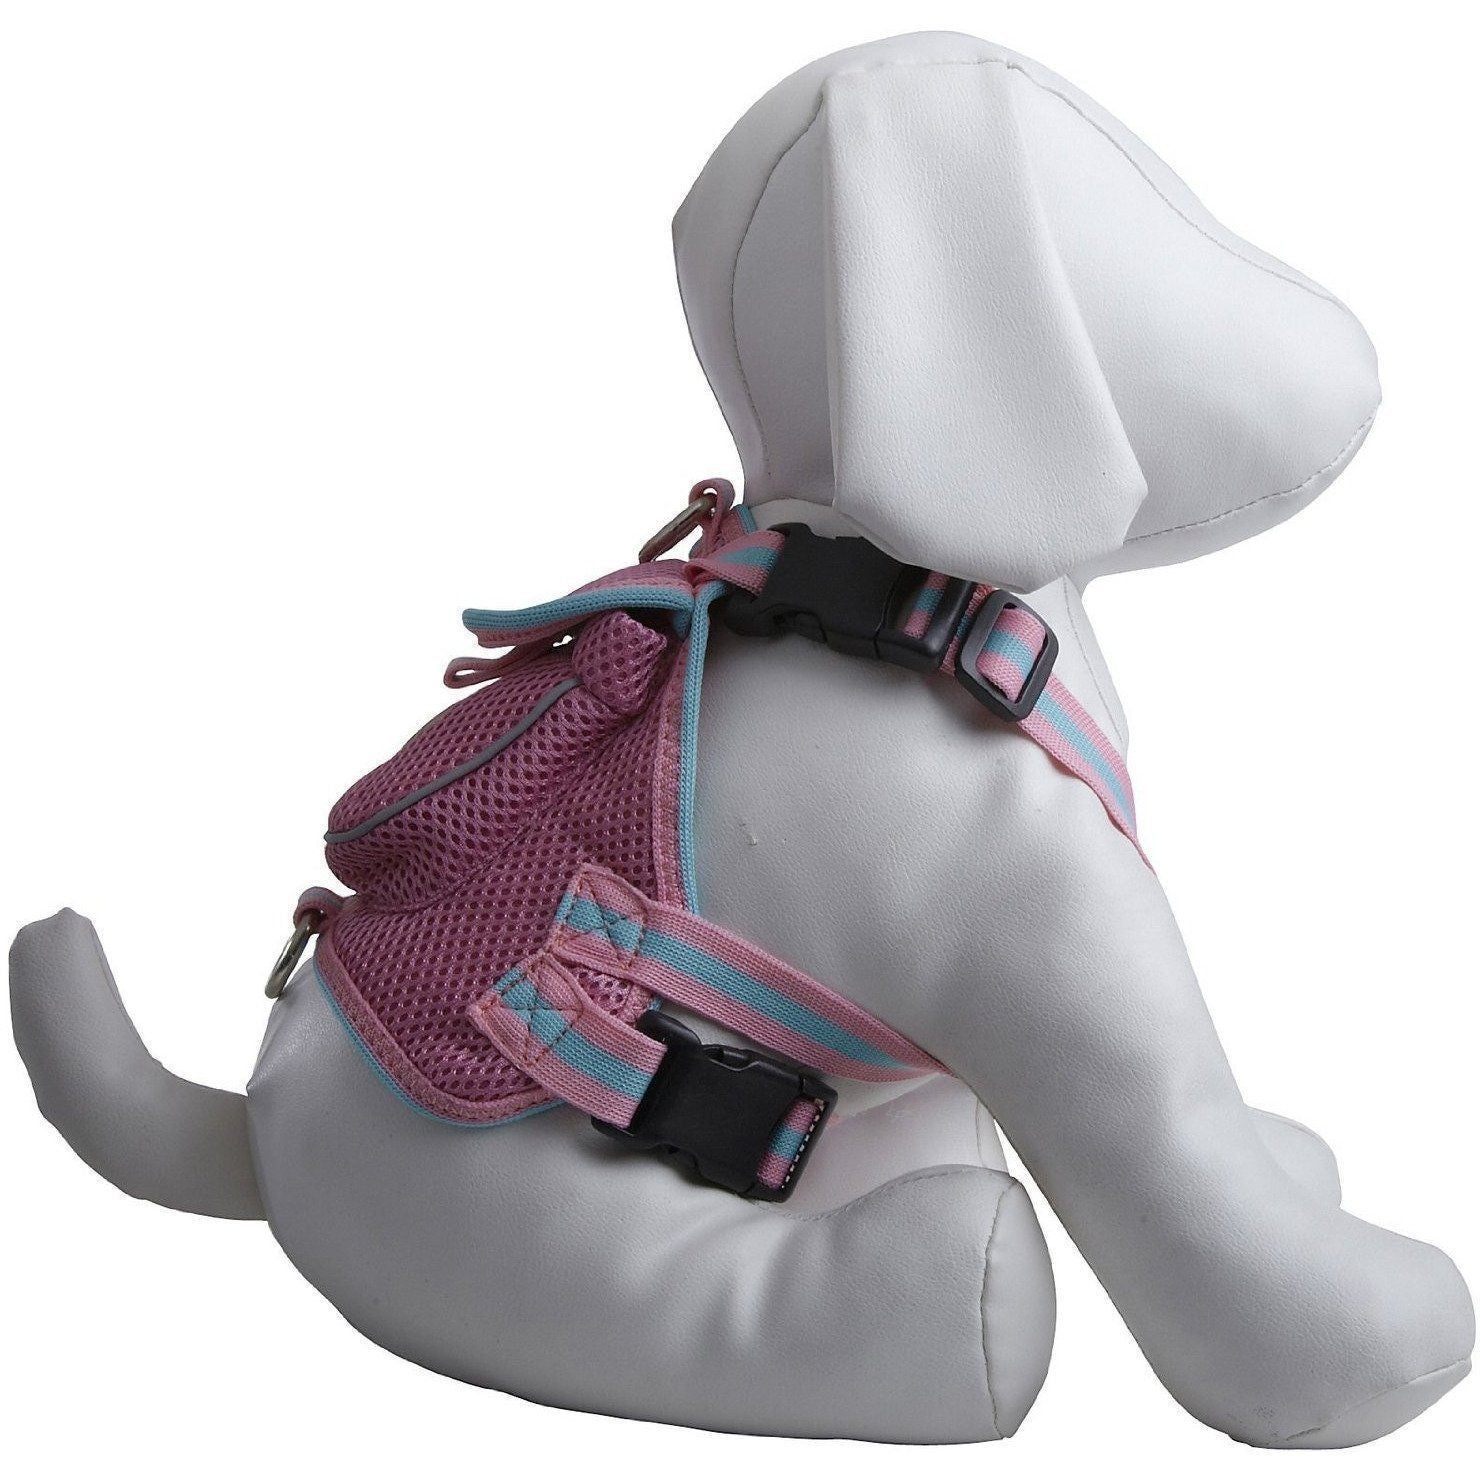 Pet Life ® 'Pocket Bark' Reflective Adjustable Fashion Pet Dog Harness w/ Hook-and-Loop Pouch and Dual Harness Rings Small Pink